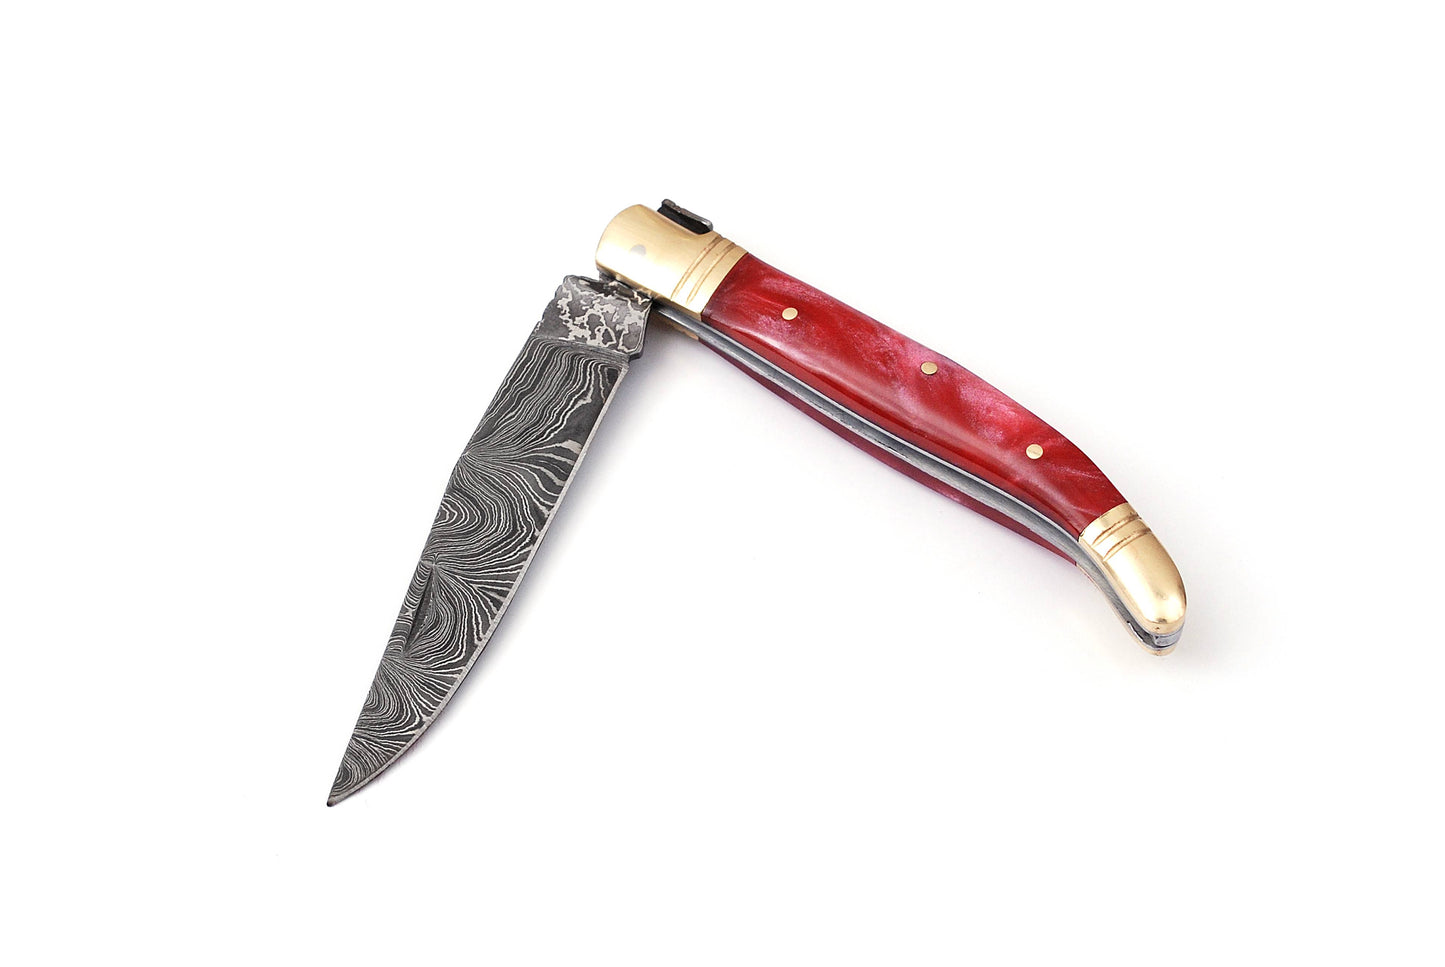 Folding Damascus steel knife, 8.5" Long with 4" hand forged custom twist pattern Blade. Unshrinkable wine color Raisen scale with brass bolster, Cow hide leather sheath included